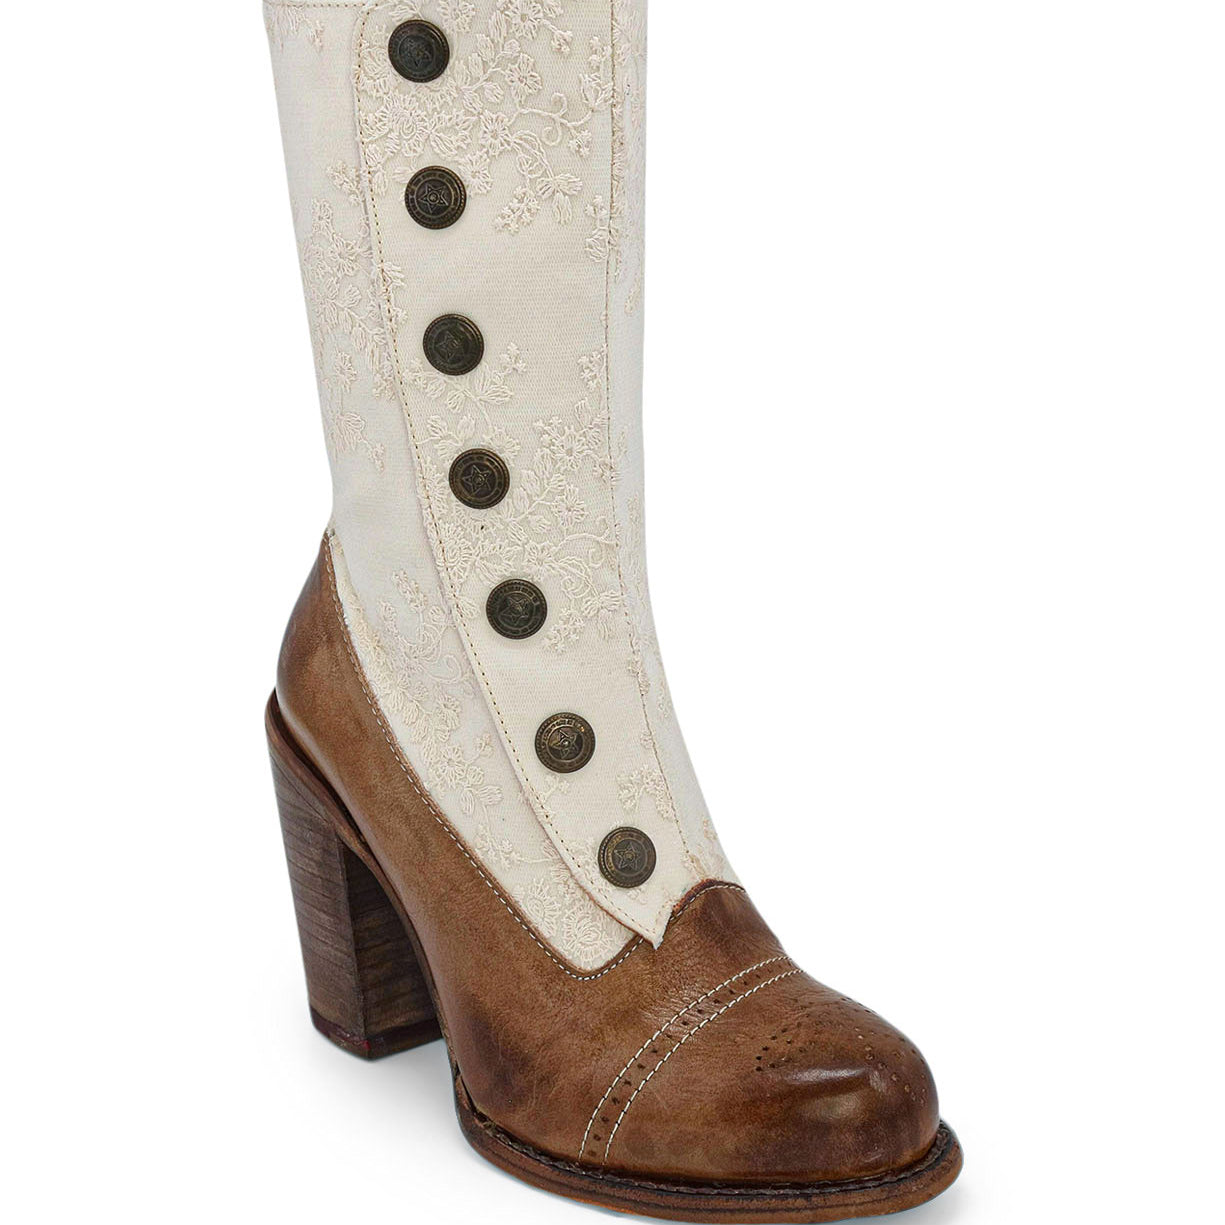 The Oak Tree Farms Amelia is a leather women's boot with buttons and a wooden heel.